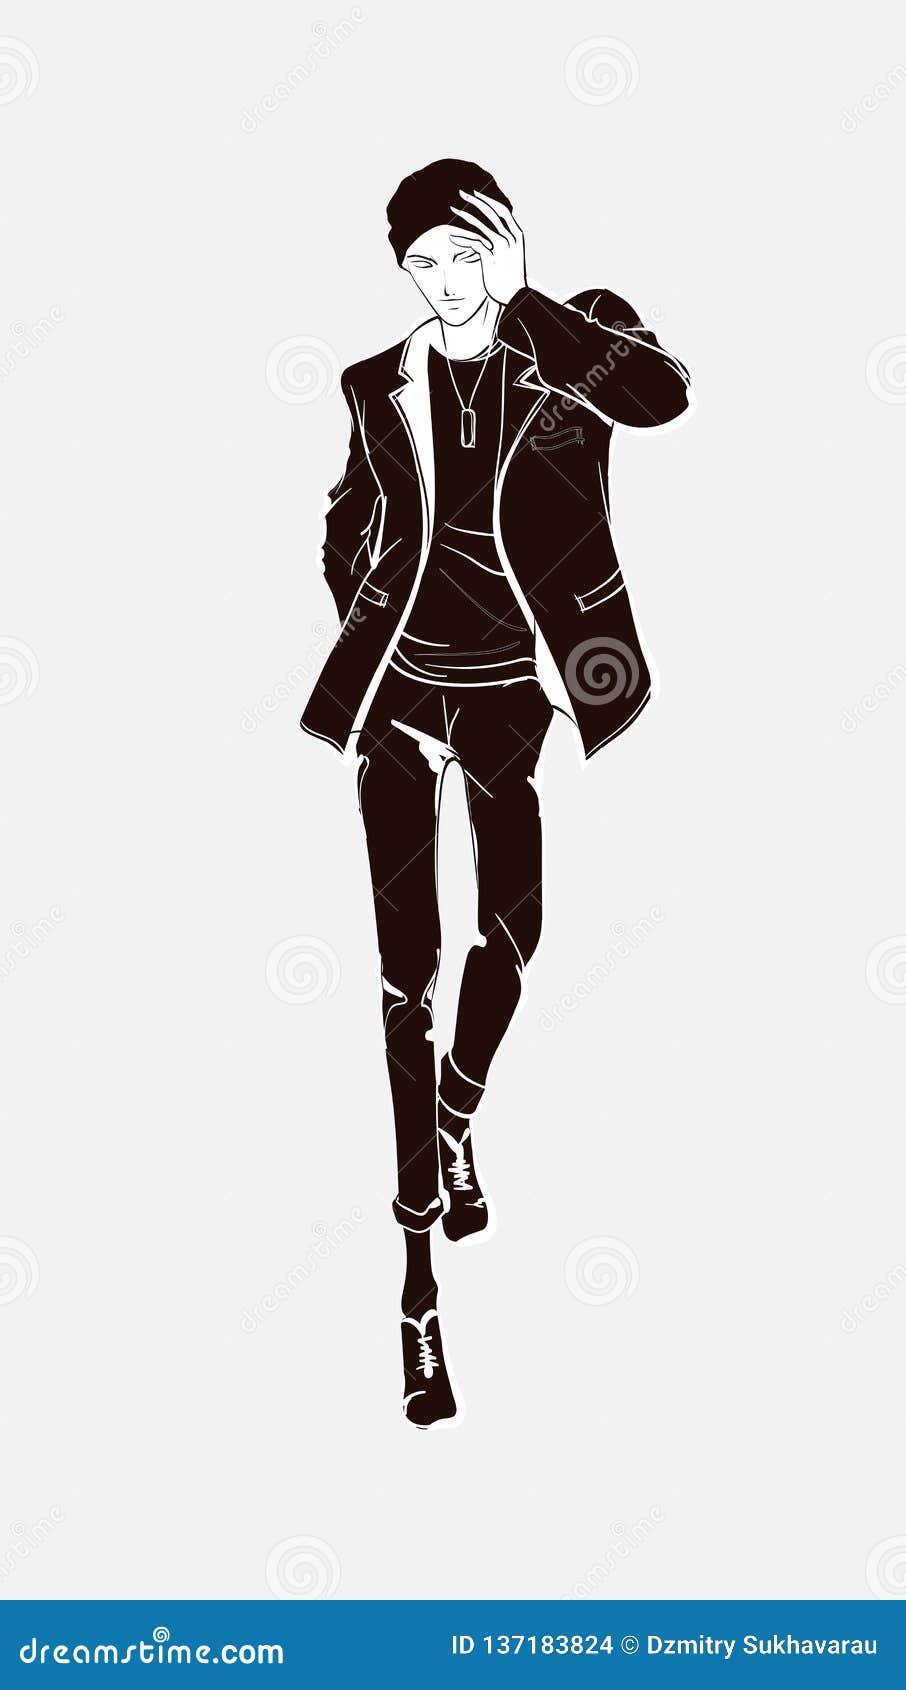 Male Fashion Sketch Stock Vector Illustration and Royalty Free Male Fashion  Sketch Clipart